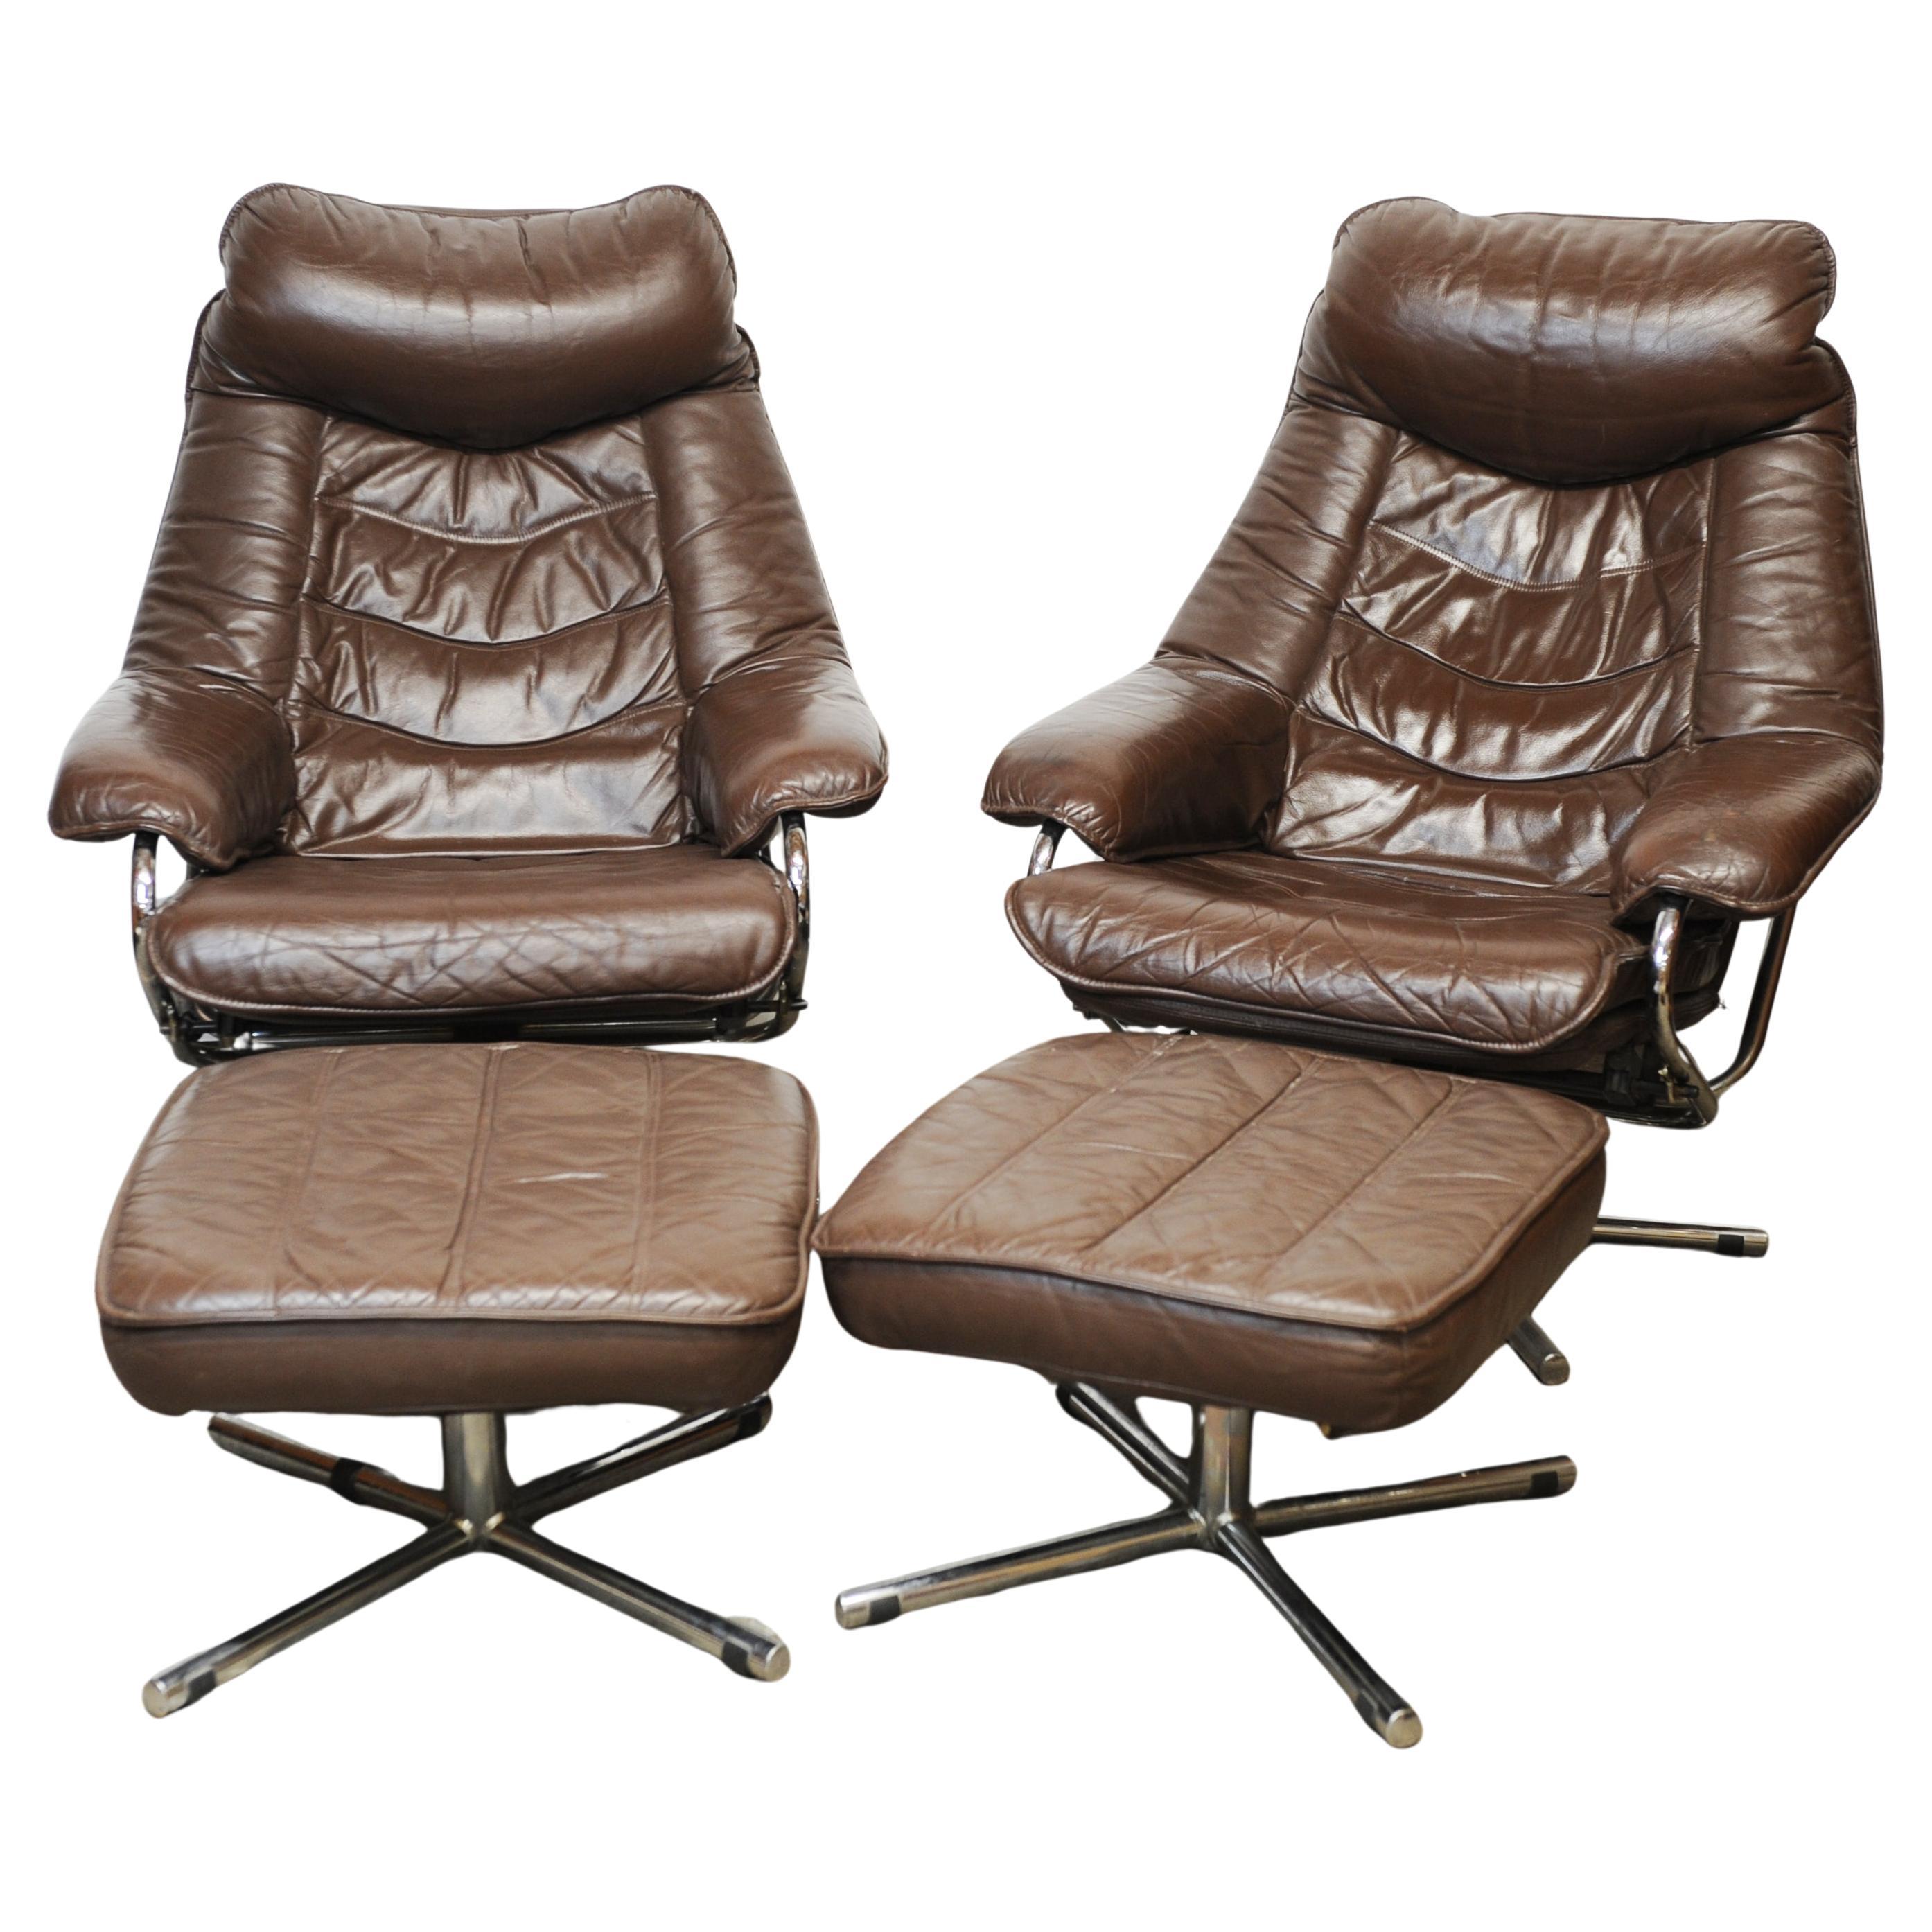 Pair of Norwegian Lounge Chairs with Footstools in Brown Leather by Skoghaus  For Sale